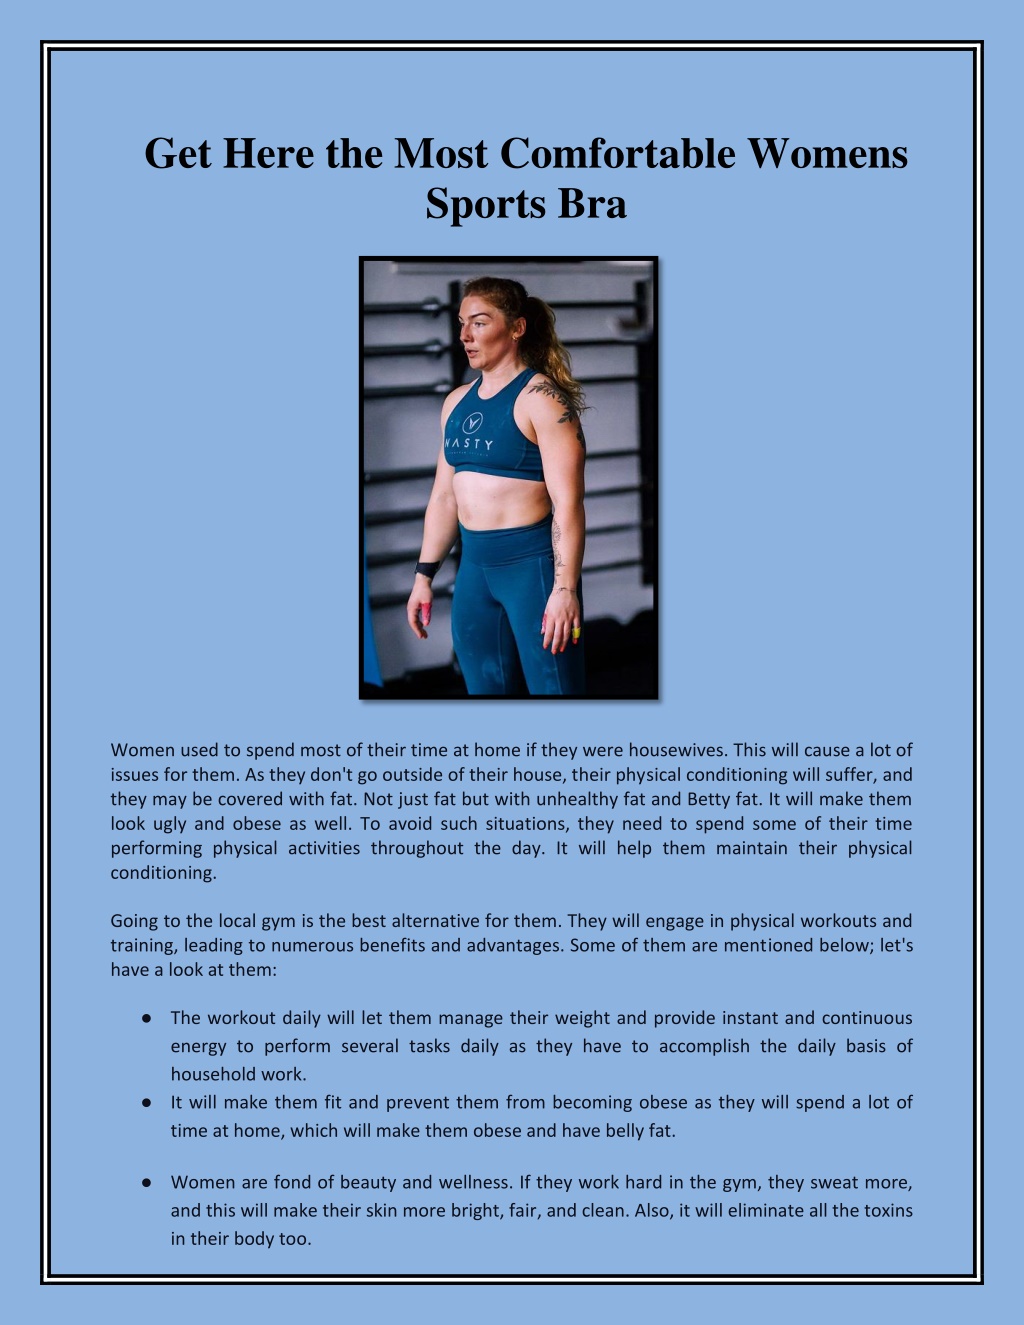 PPT - Get Here the Most Comfortable Womens Sports Bra PowerPoint